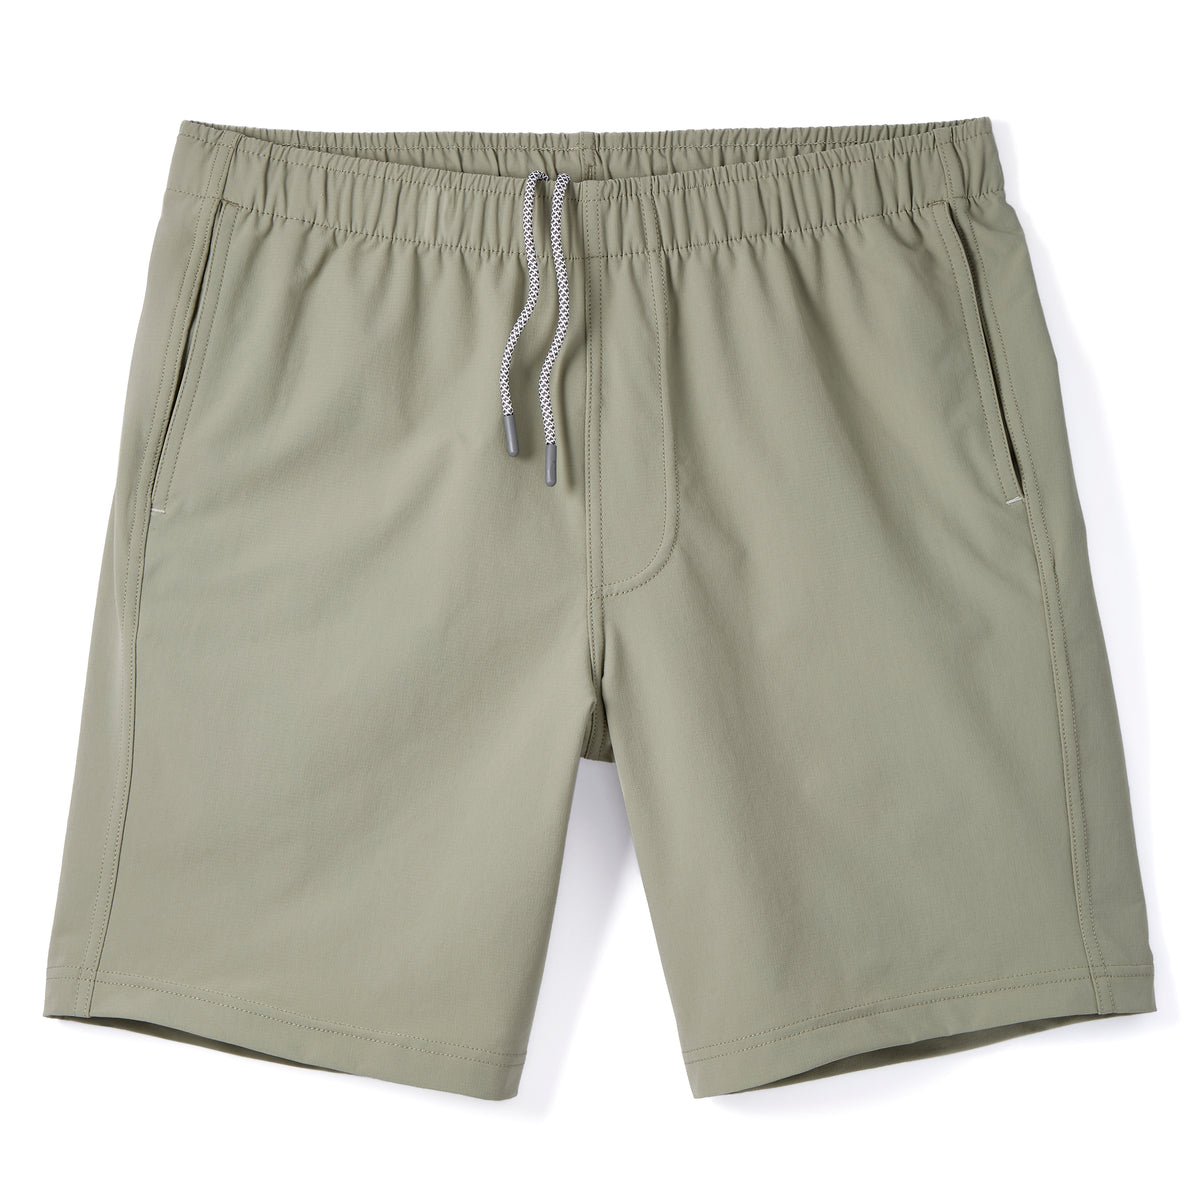 Everyday Short in Dusty Olive Green | Athletic Shorts | Myles Apparel ...